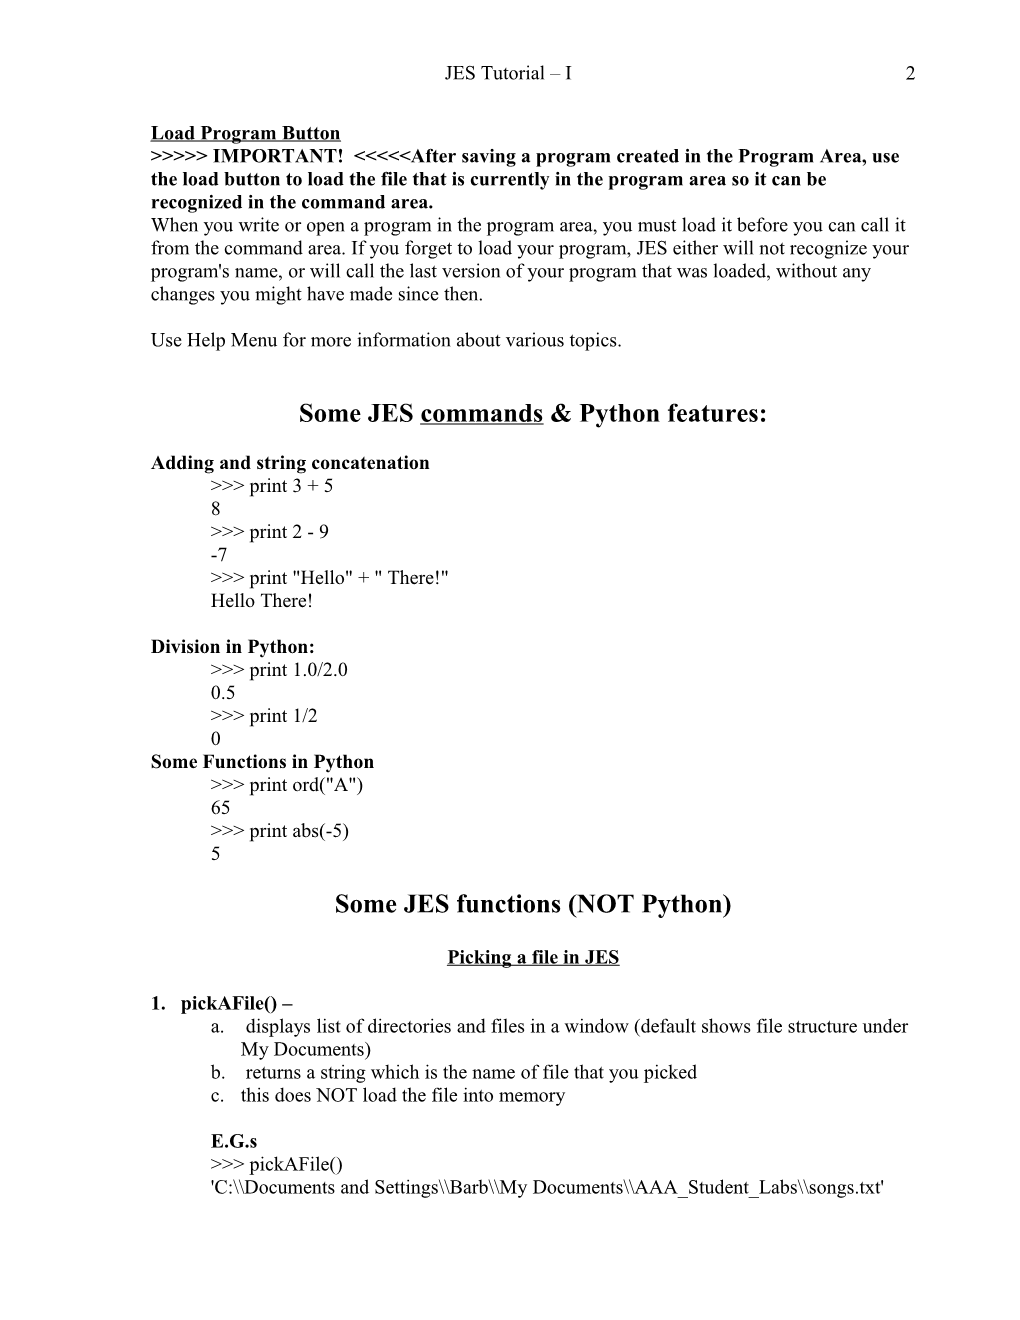 JES (Jython Environment for Students) Tutorial I